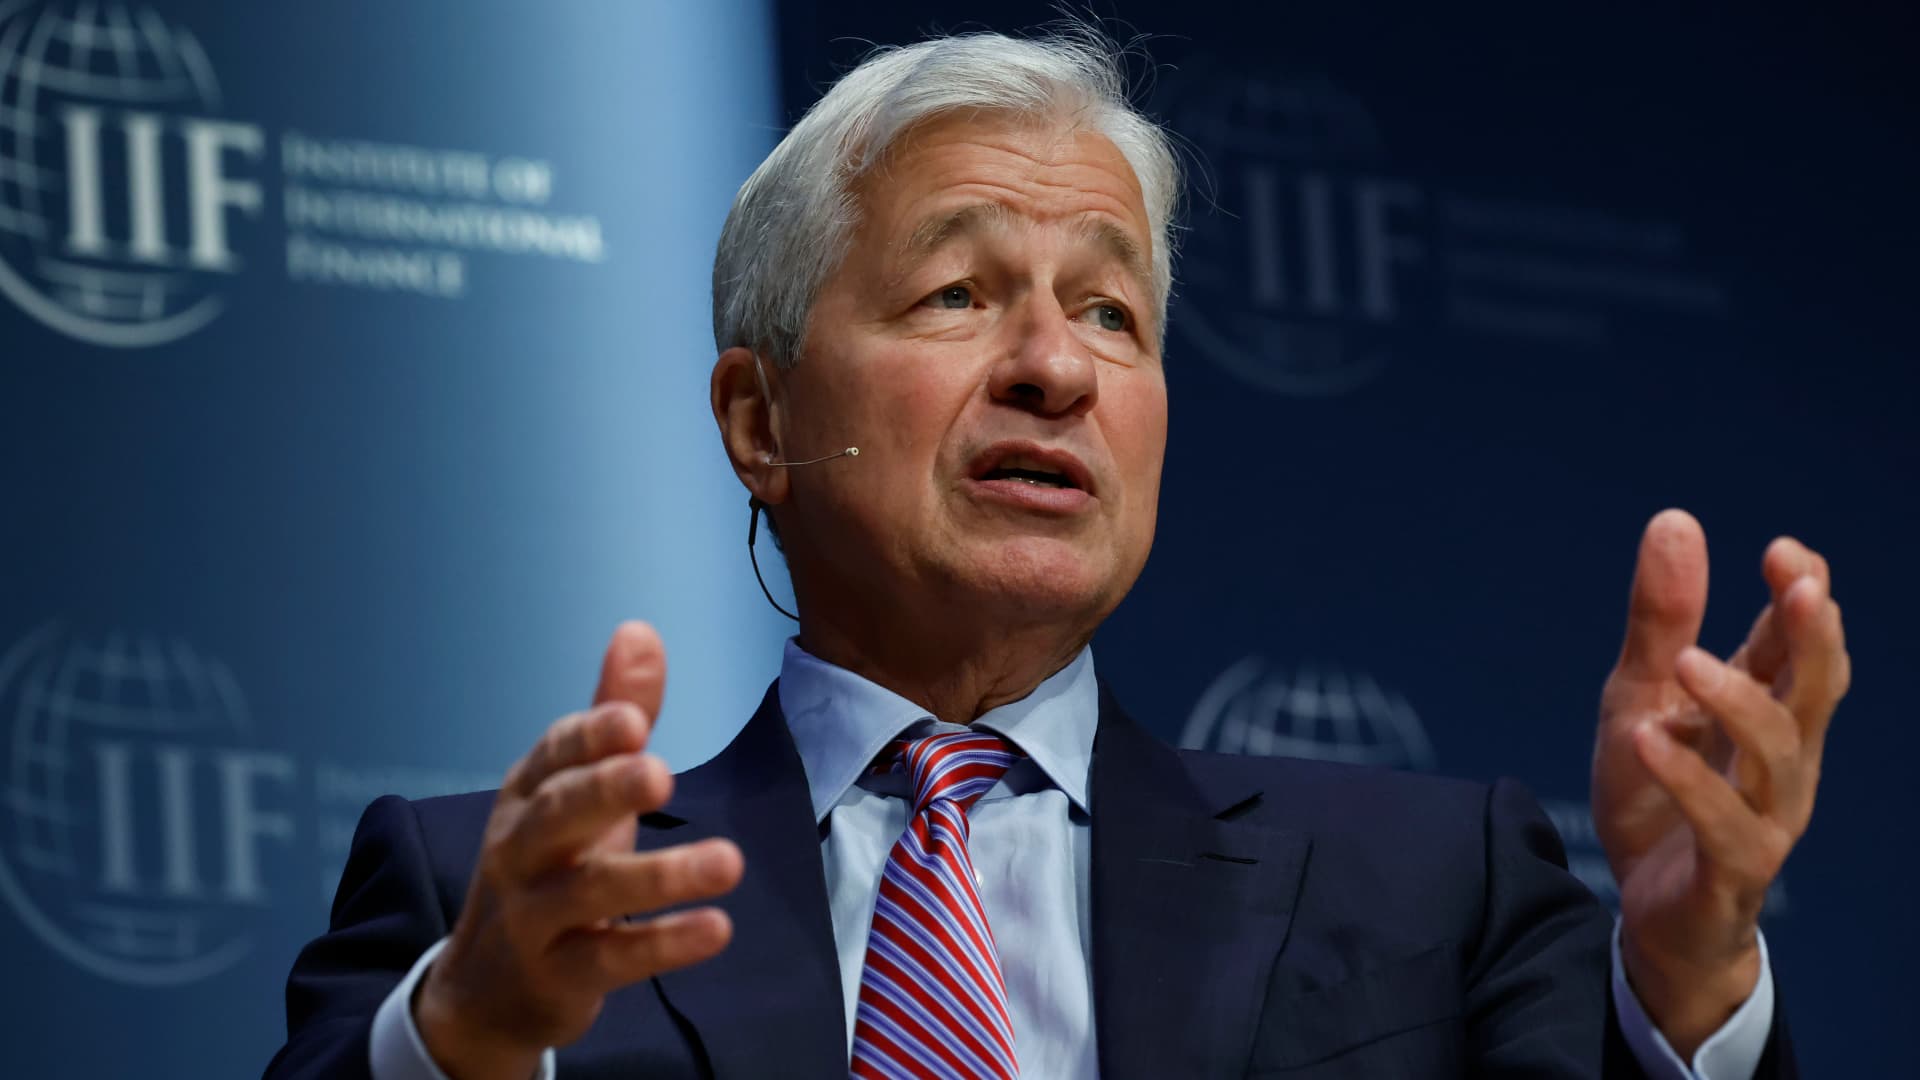 Jamie Dimon says it’s a ‘large mistake’ to think economy will boom with so many risks out there